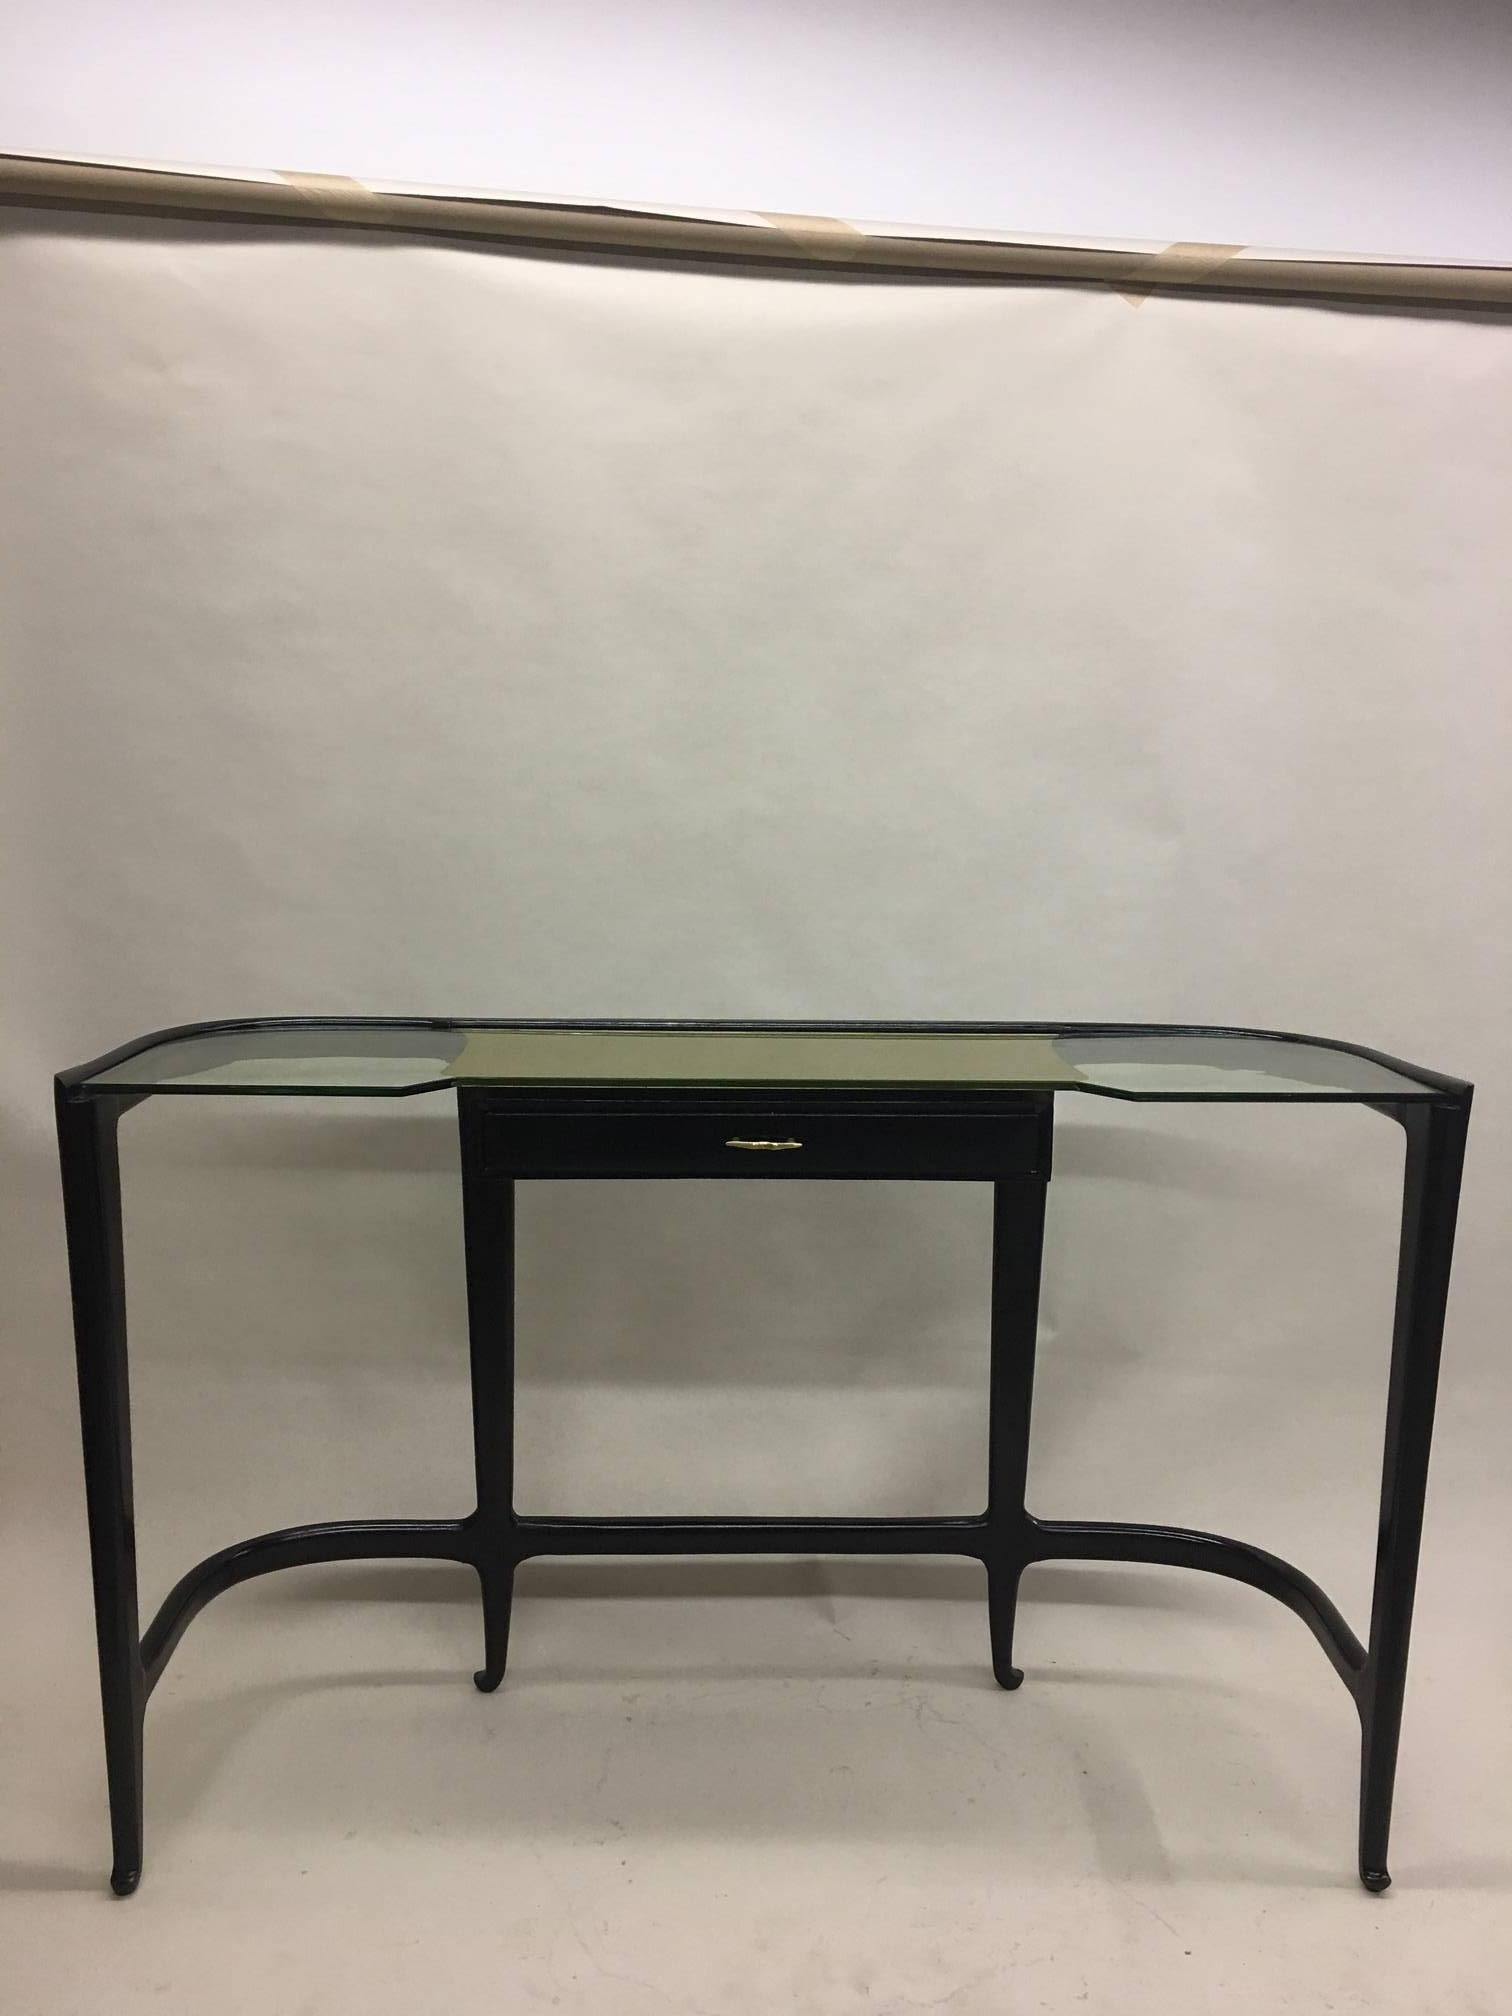 A Rare and Exquisite Italian Midcentury console or writing table attributed to Guglielmo Ulrich, circa 1940-1950 uniting Modern, Neoclassical and Art Deco sensibilities. The console is of exceptional size, form and lines that pleases the eye; and